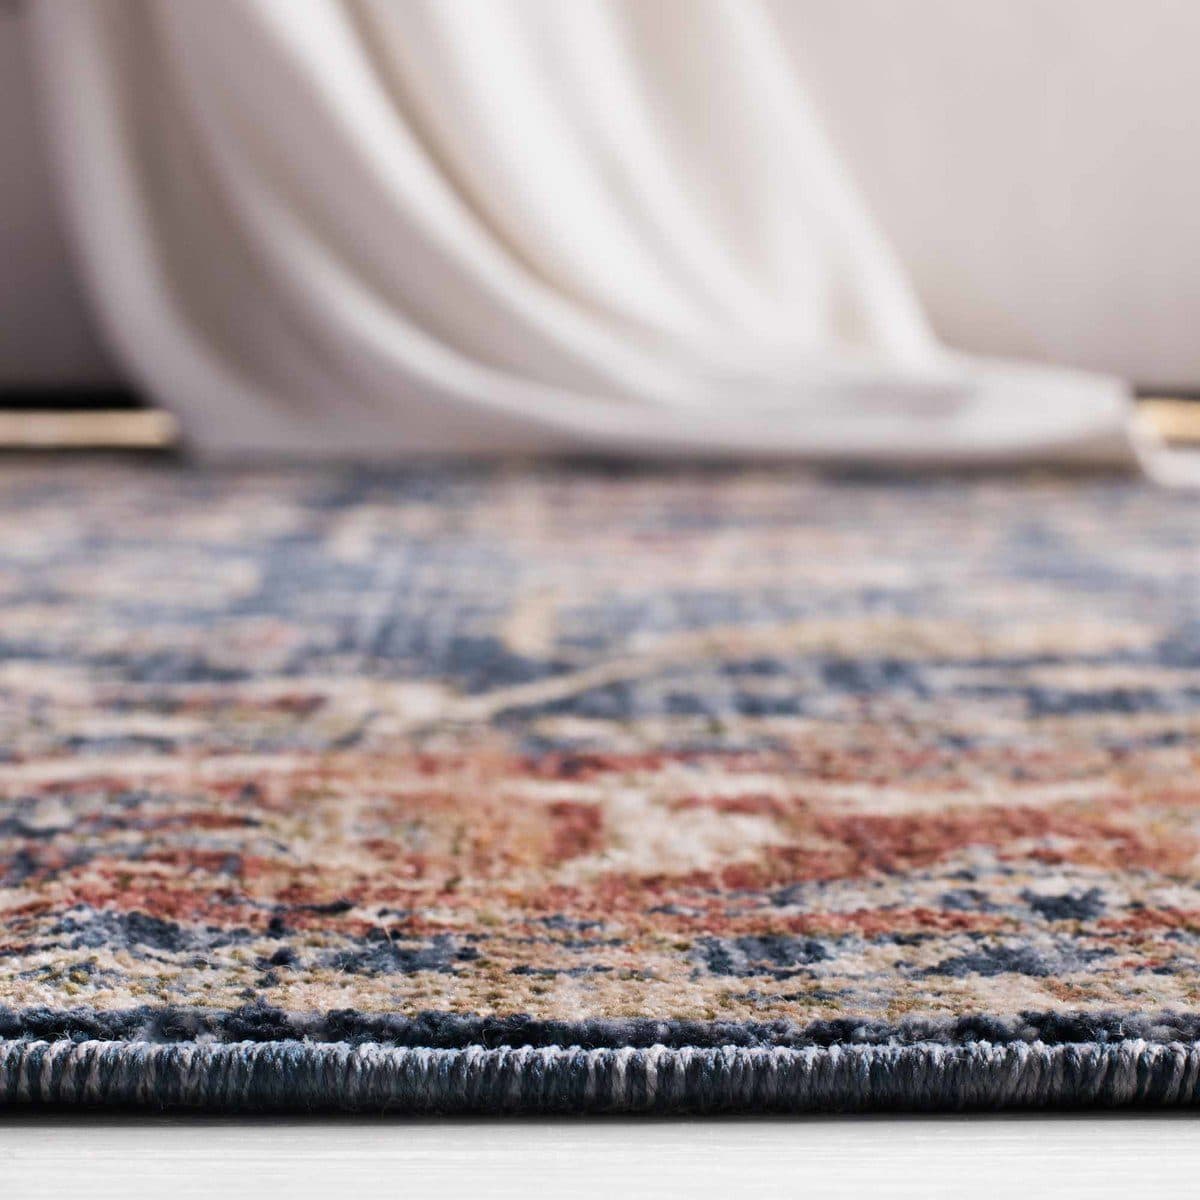 Giveaway: Win A Safavieh Home Area Rug Just In Time For The Holidays